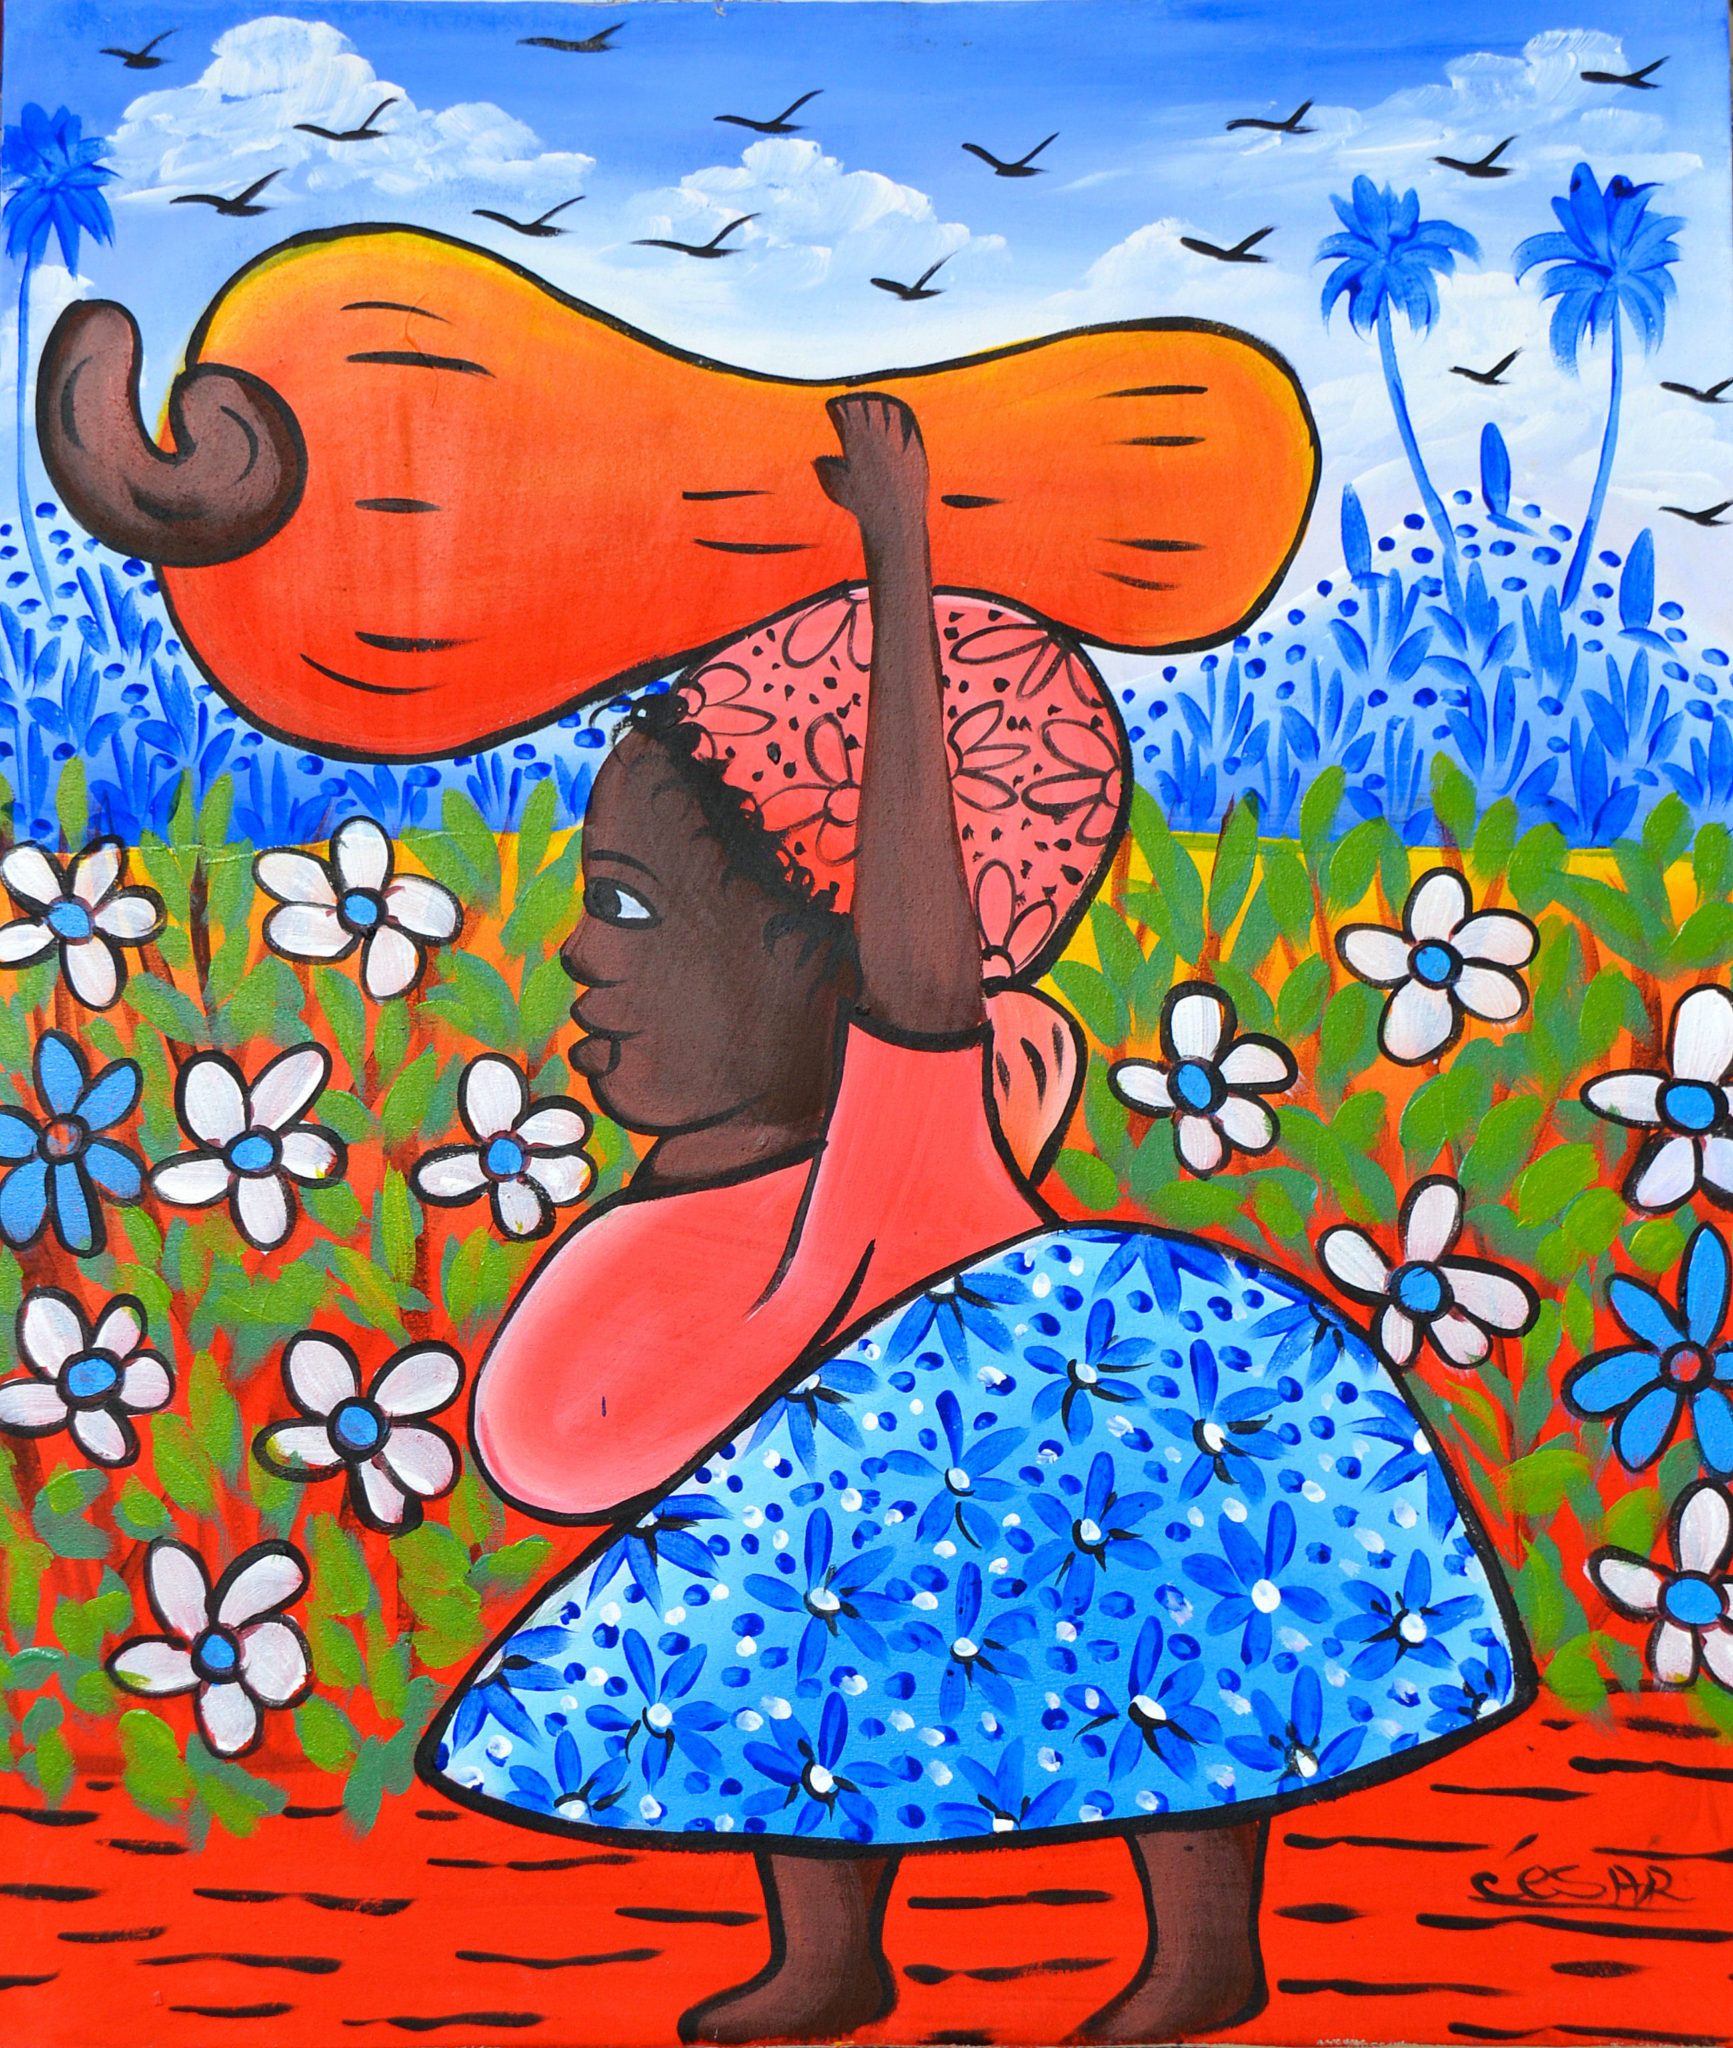 Painting from the Dominican Republic